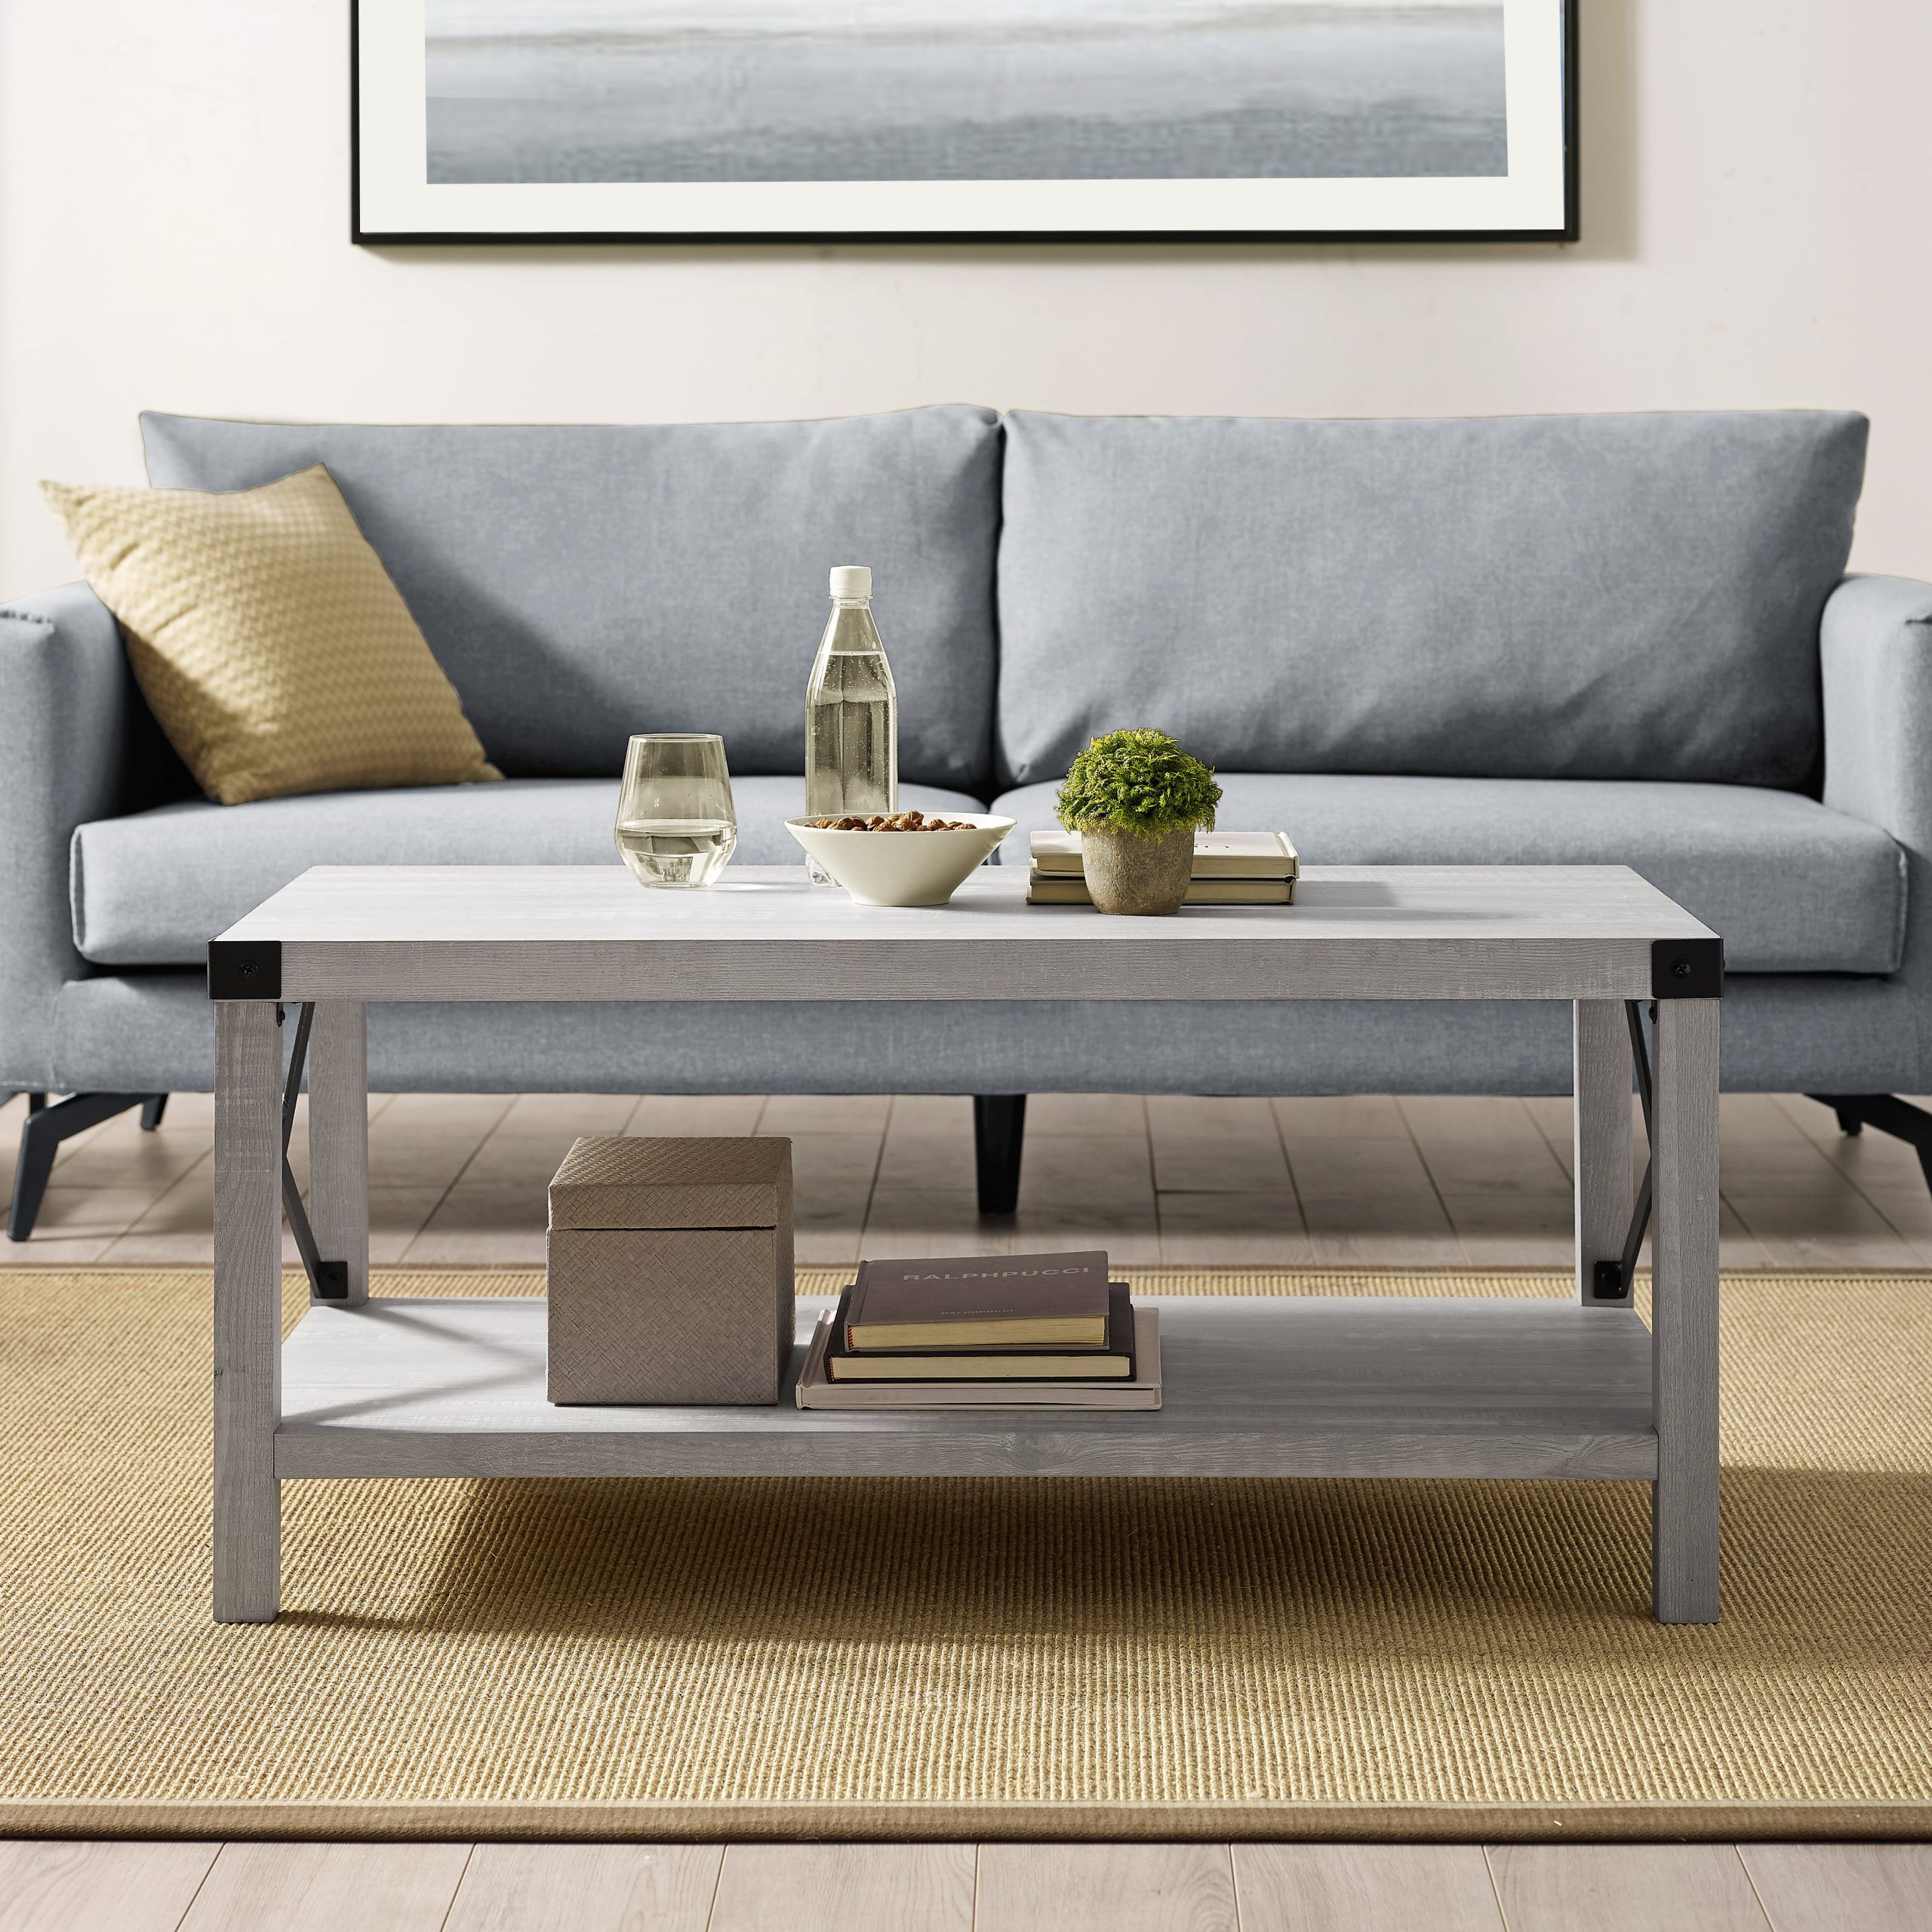 Woven Paths Magnolia Metal X Coffee Table, Stone Grey – Walmart Regarding Woven Paths Coffee Tables (View 7 of 15)